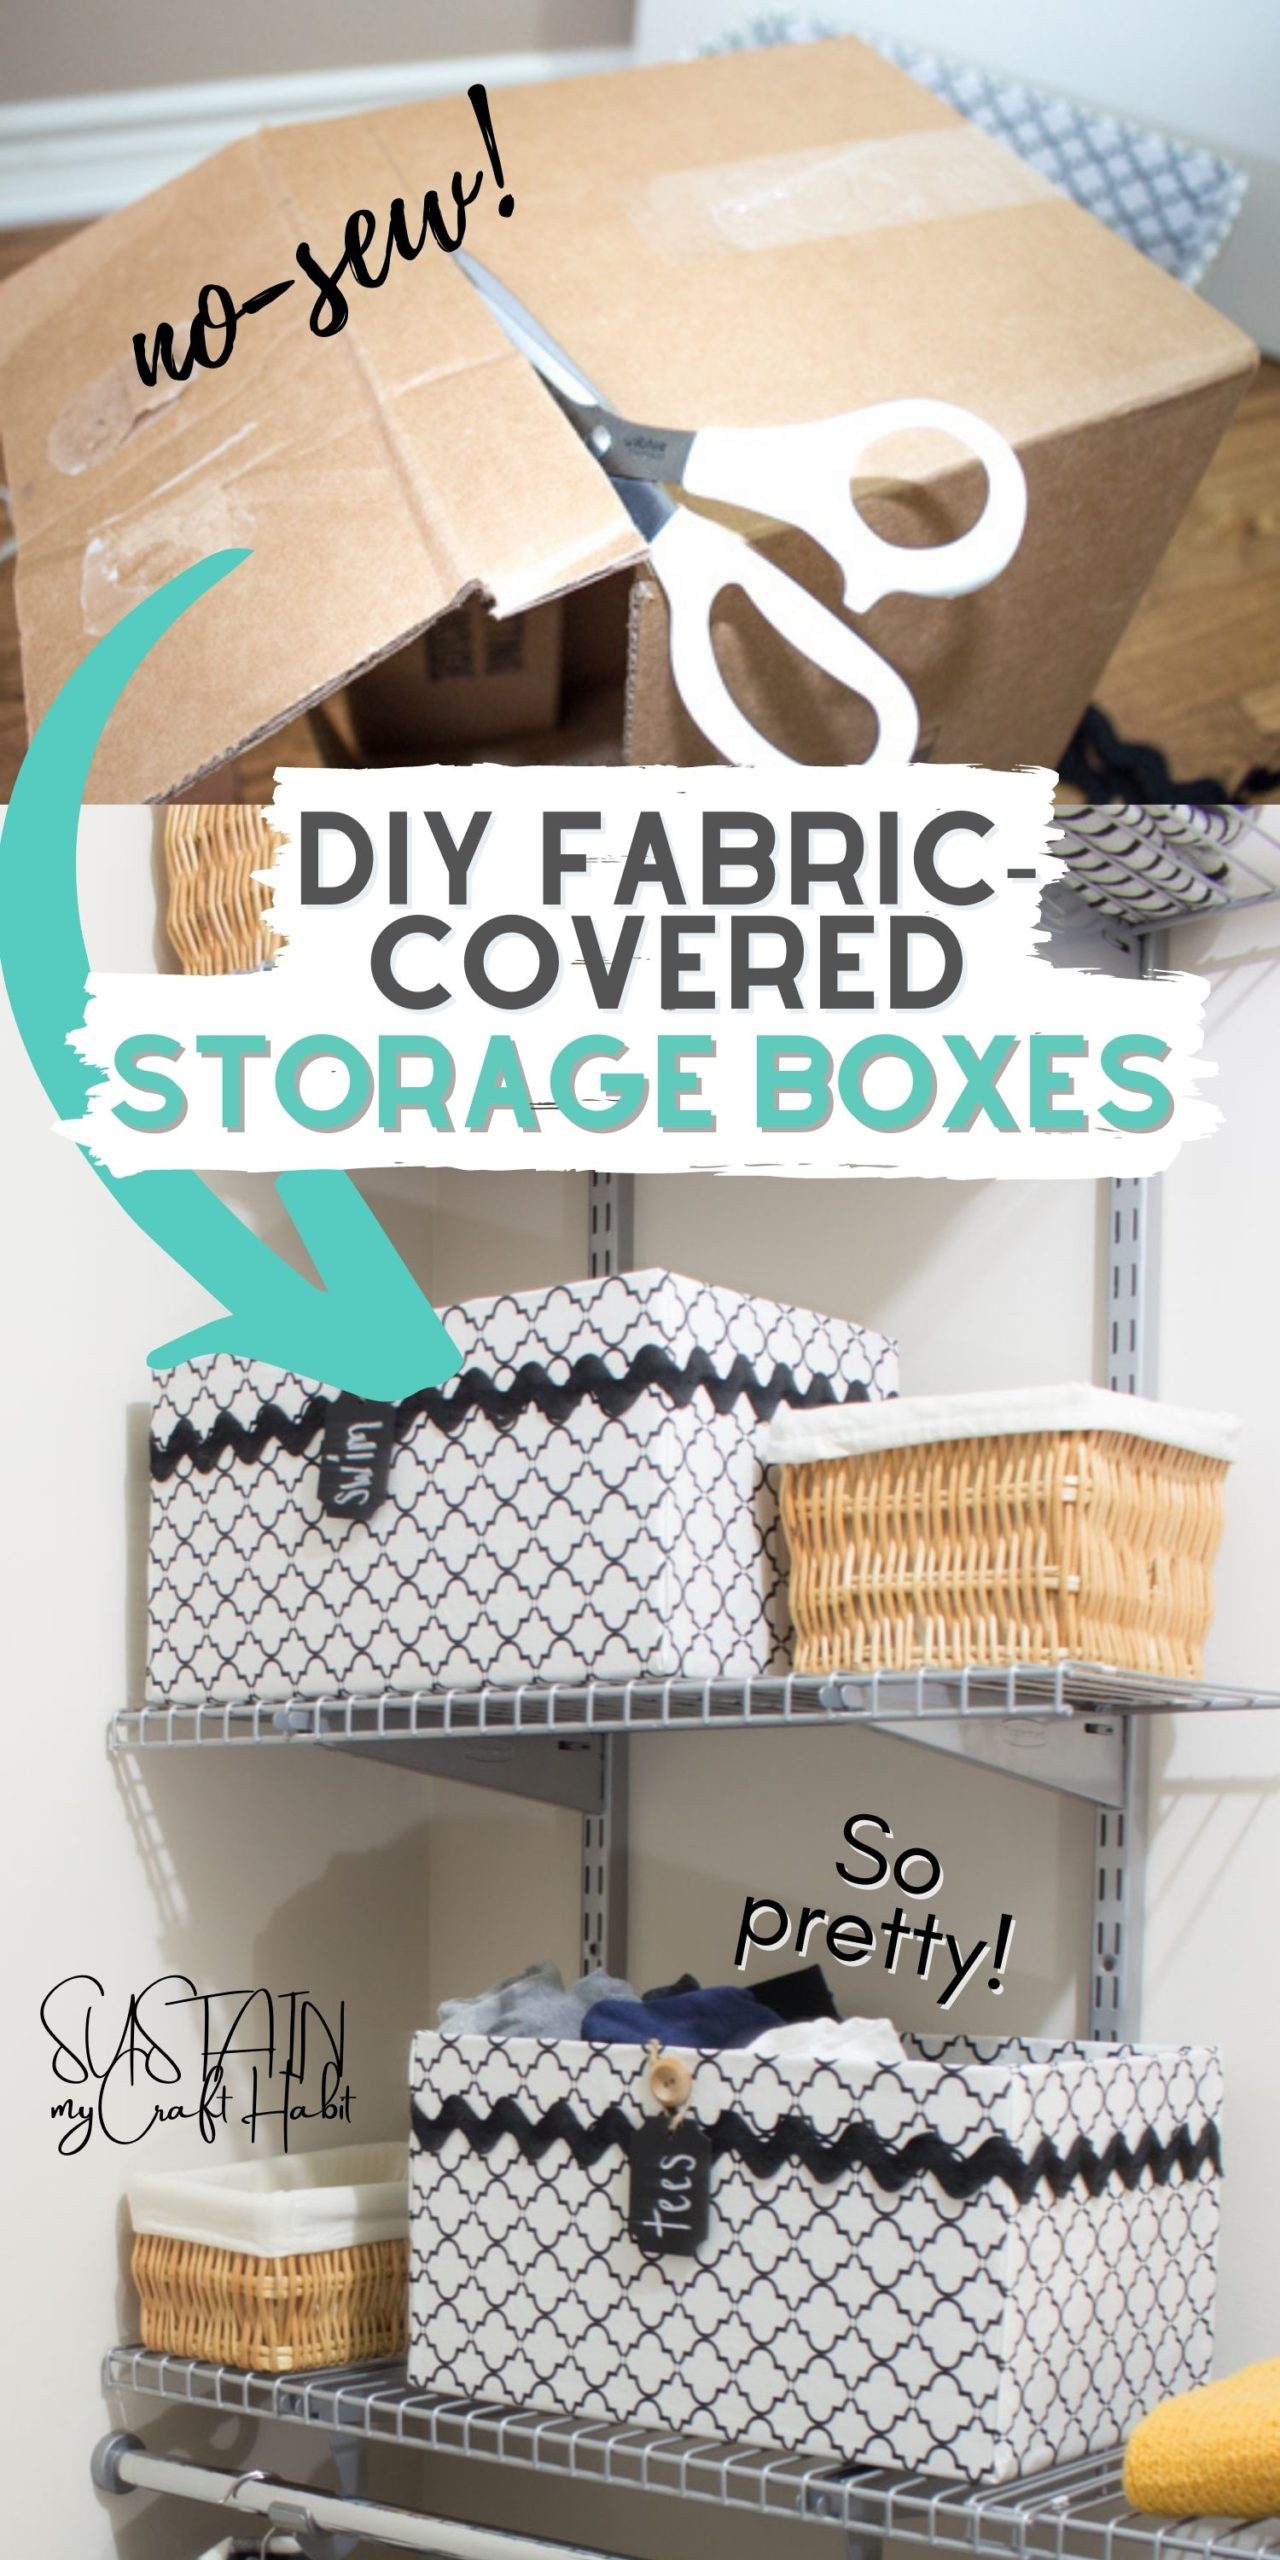 Collage with a cardboard box on top with an arrow pointing down to the finished decorative storage boxes styled on closet shelves.